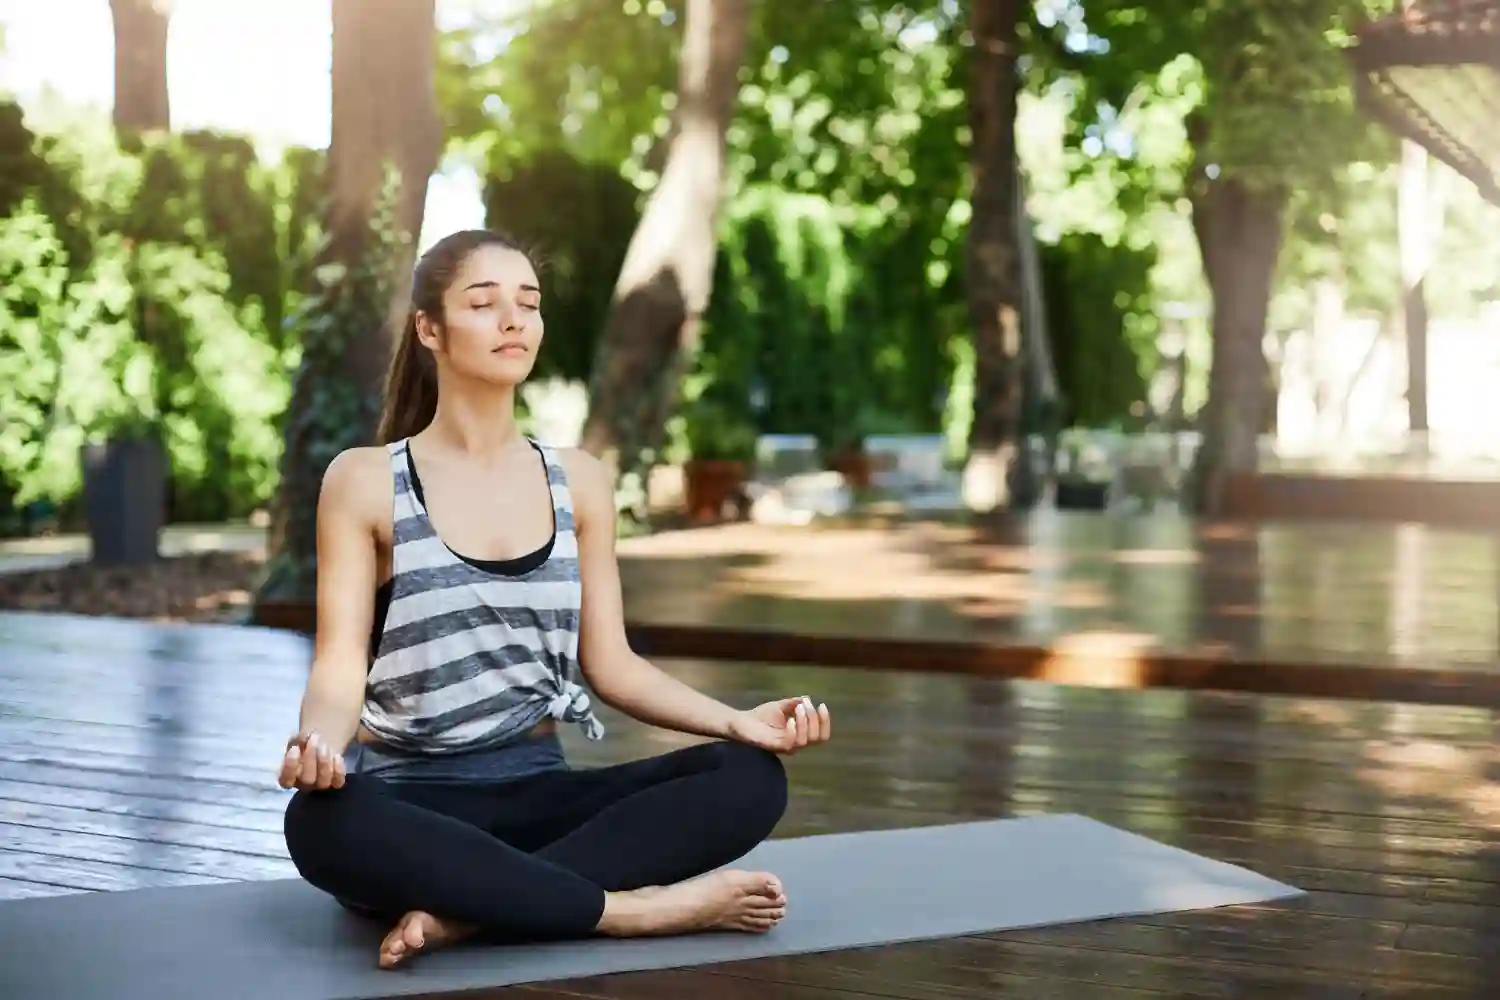 Achieving inner peace and relaxation with yoga